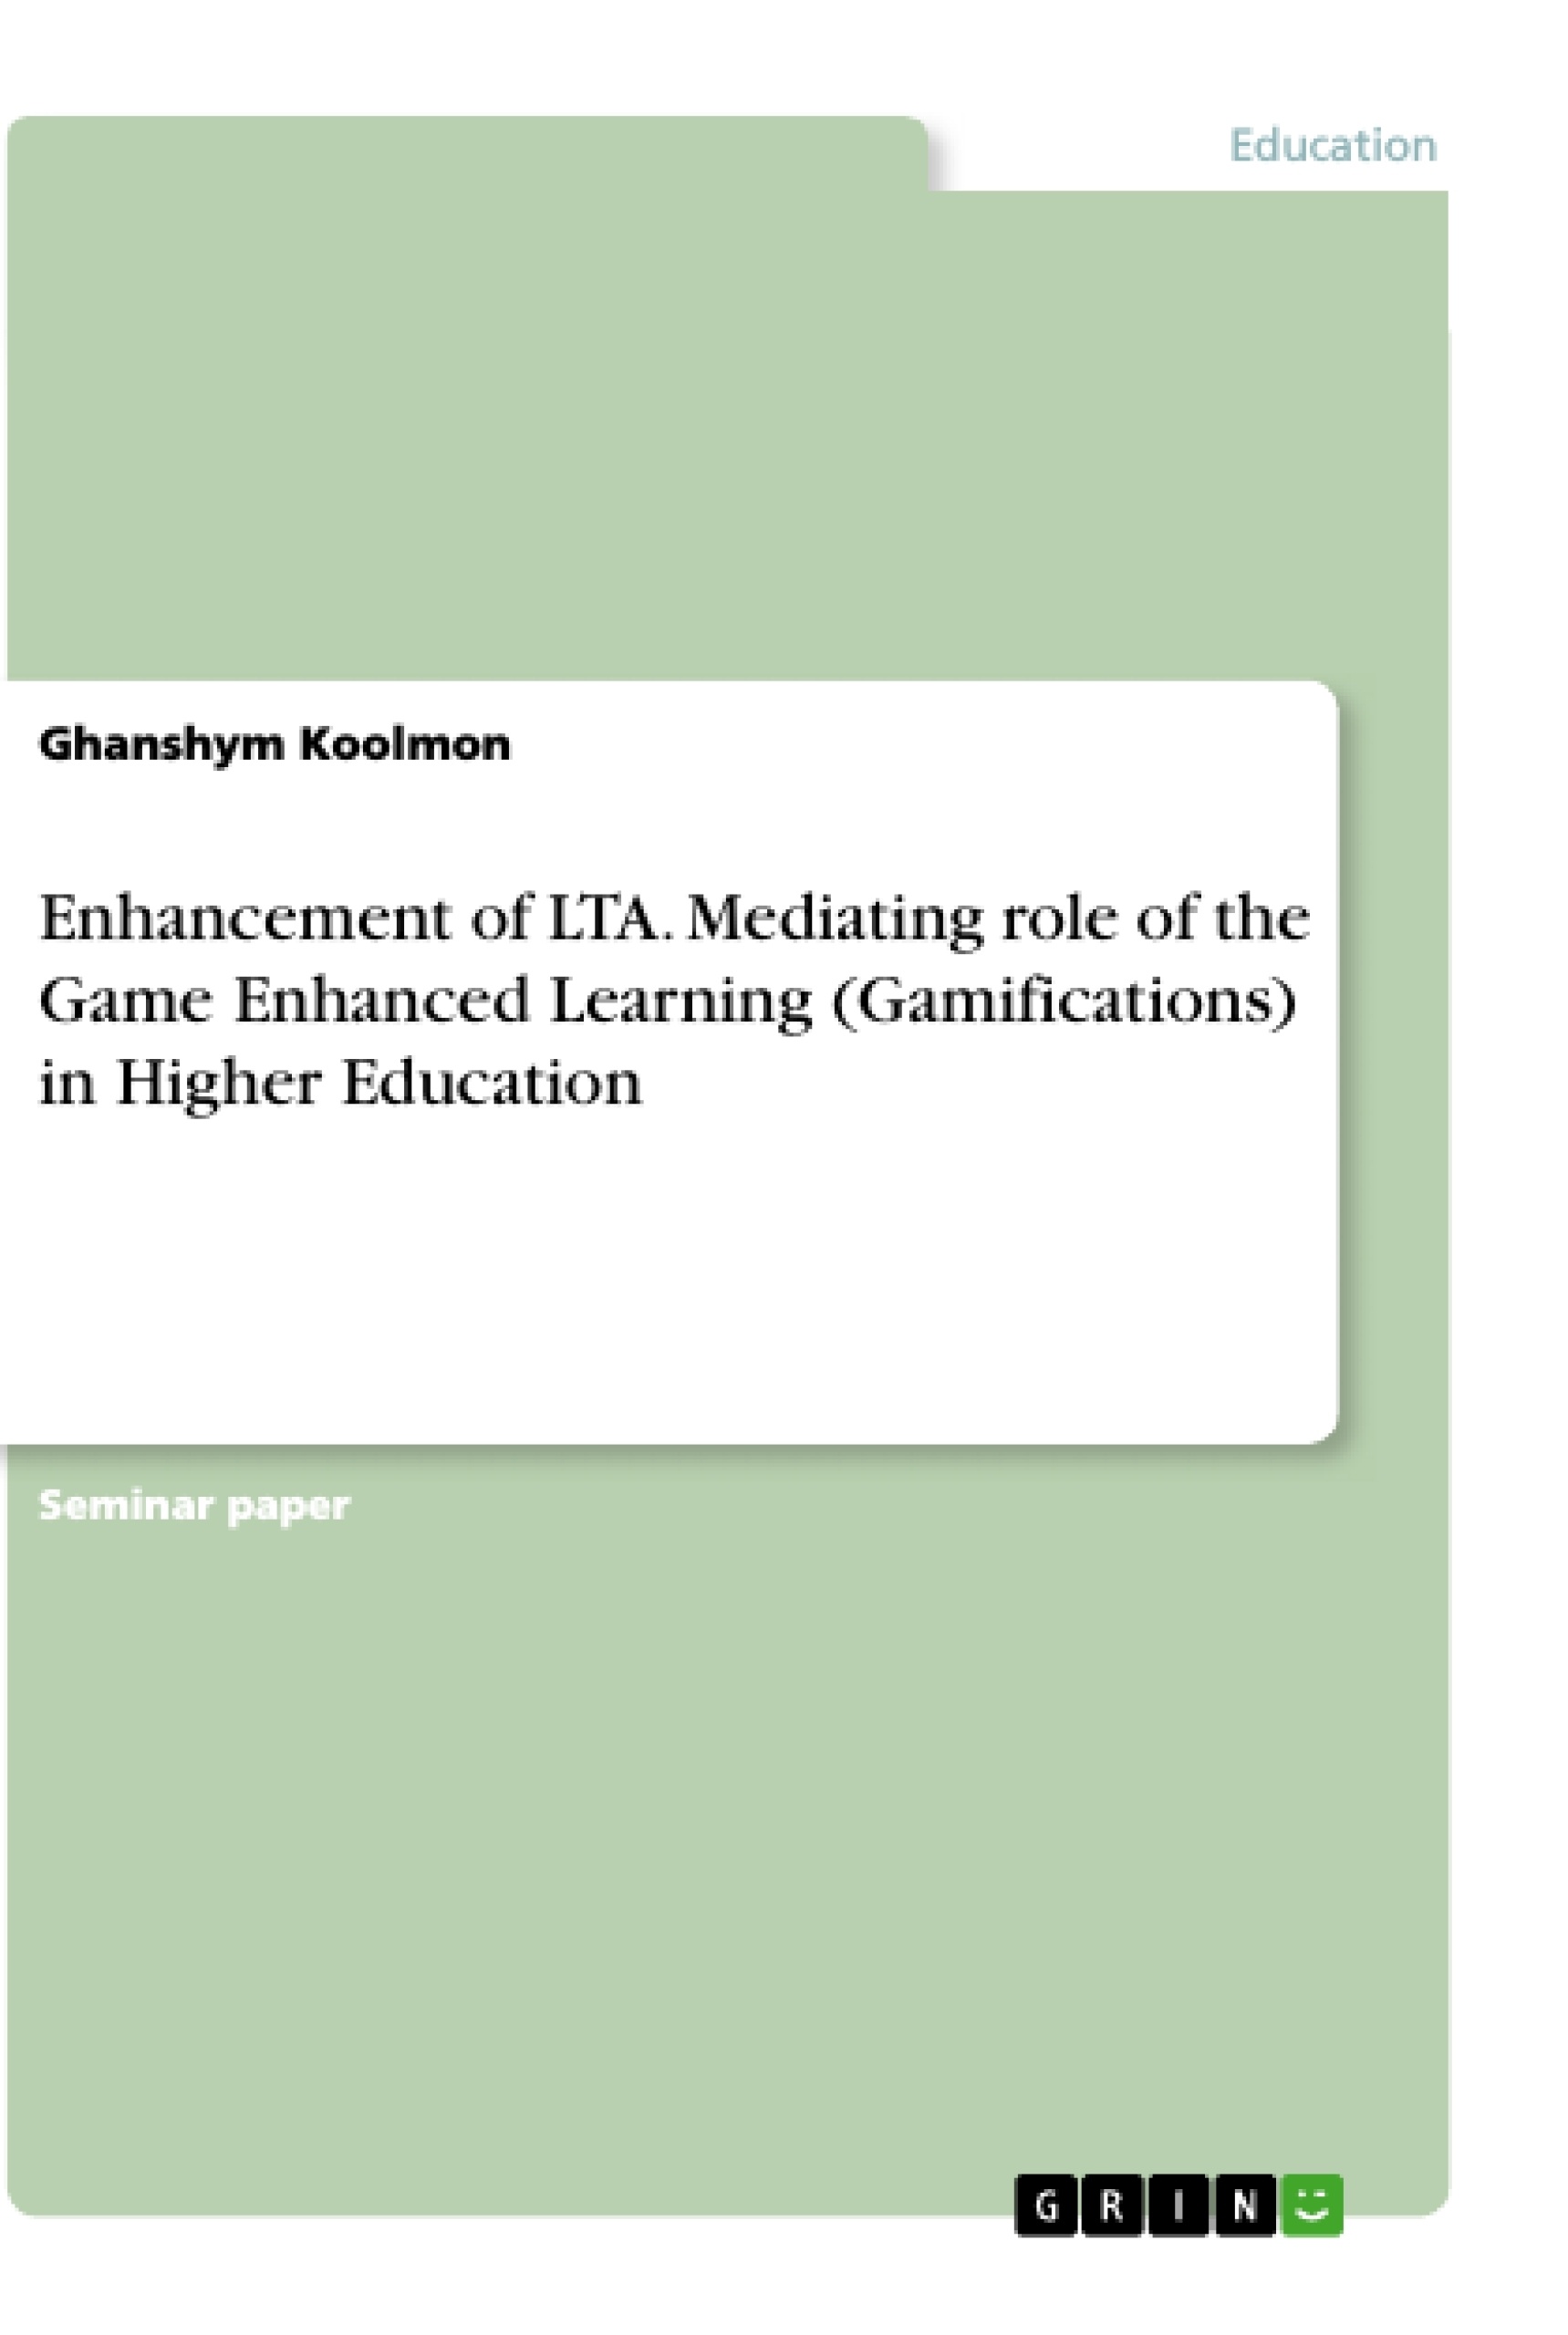 Título: Enhancement of LTA. Mediating role of the Game Enhanced Learning (Gamifications) in Higher Education